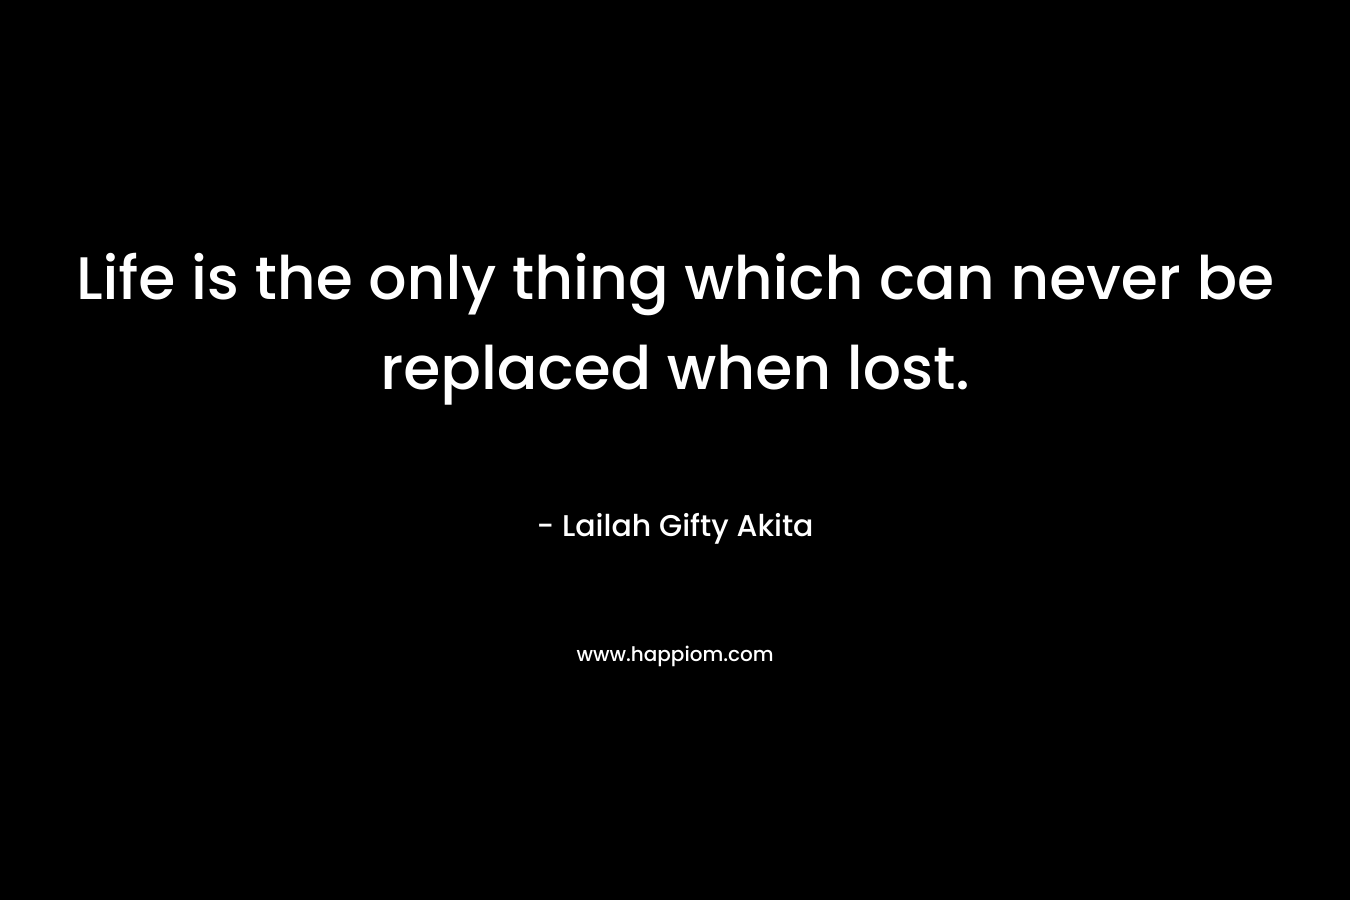 Life is the only thing which can never be replaced when lost.